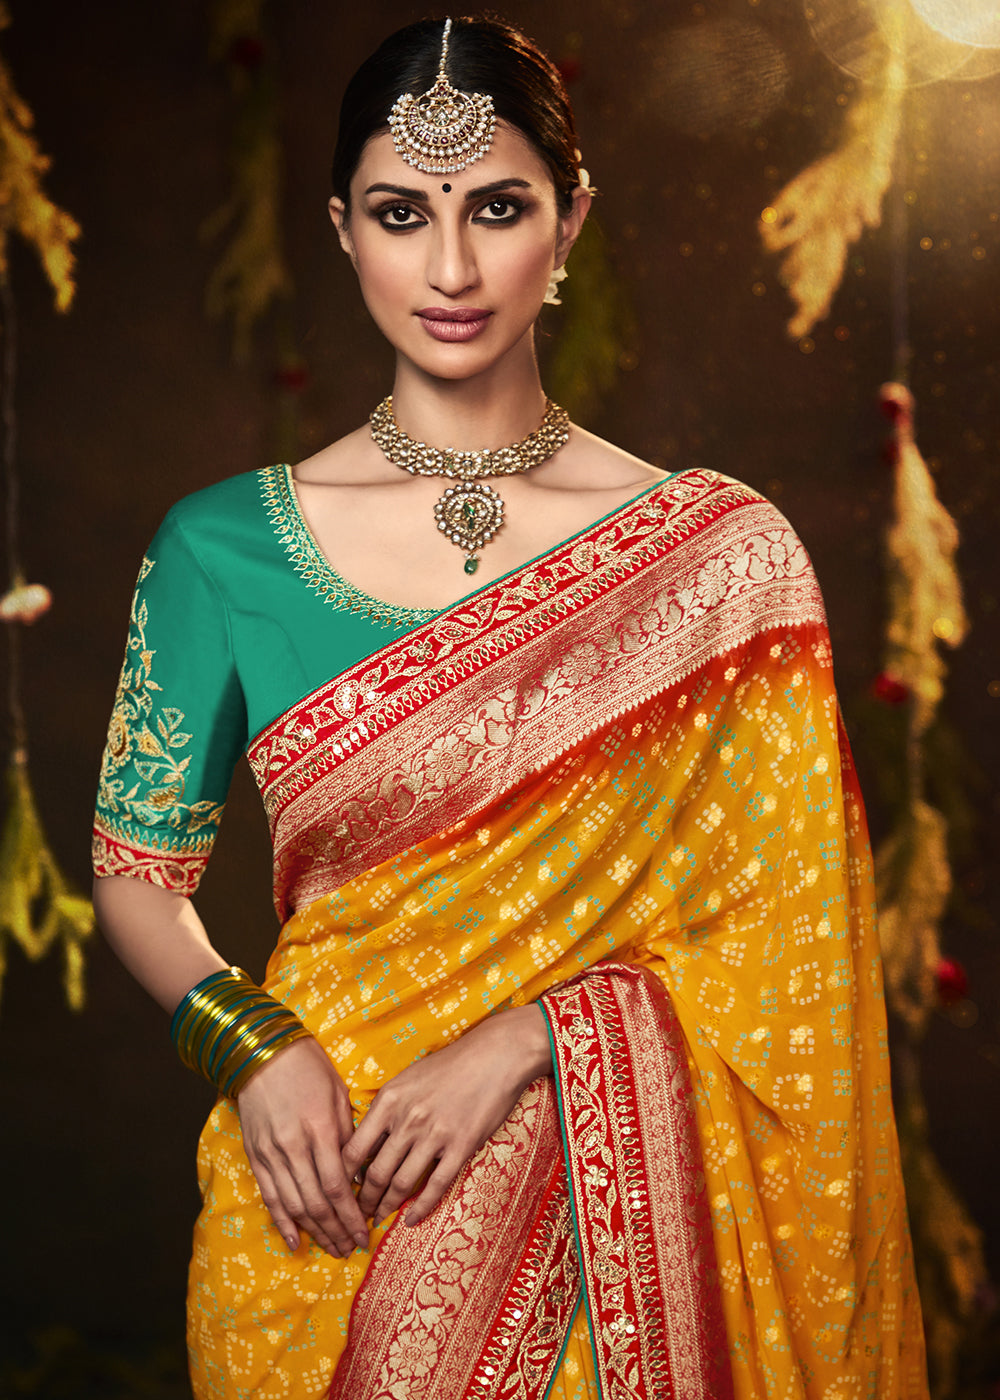 Fiery Orange and Red Georgette Bandhani Saree